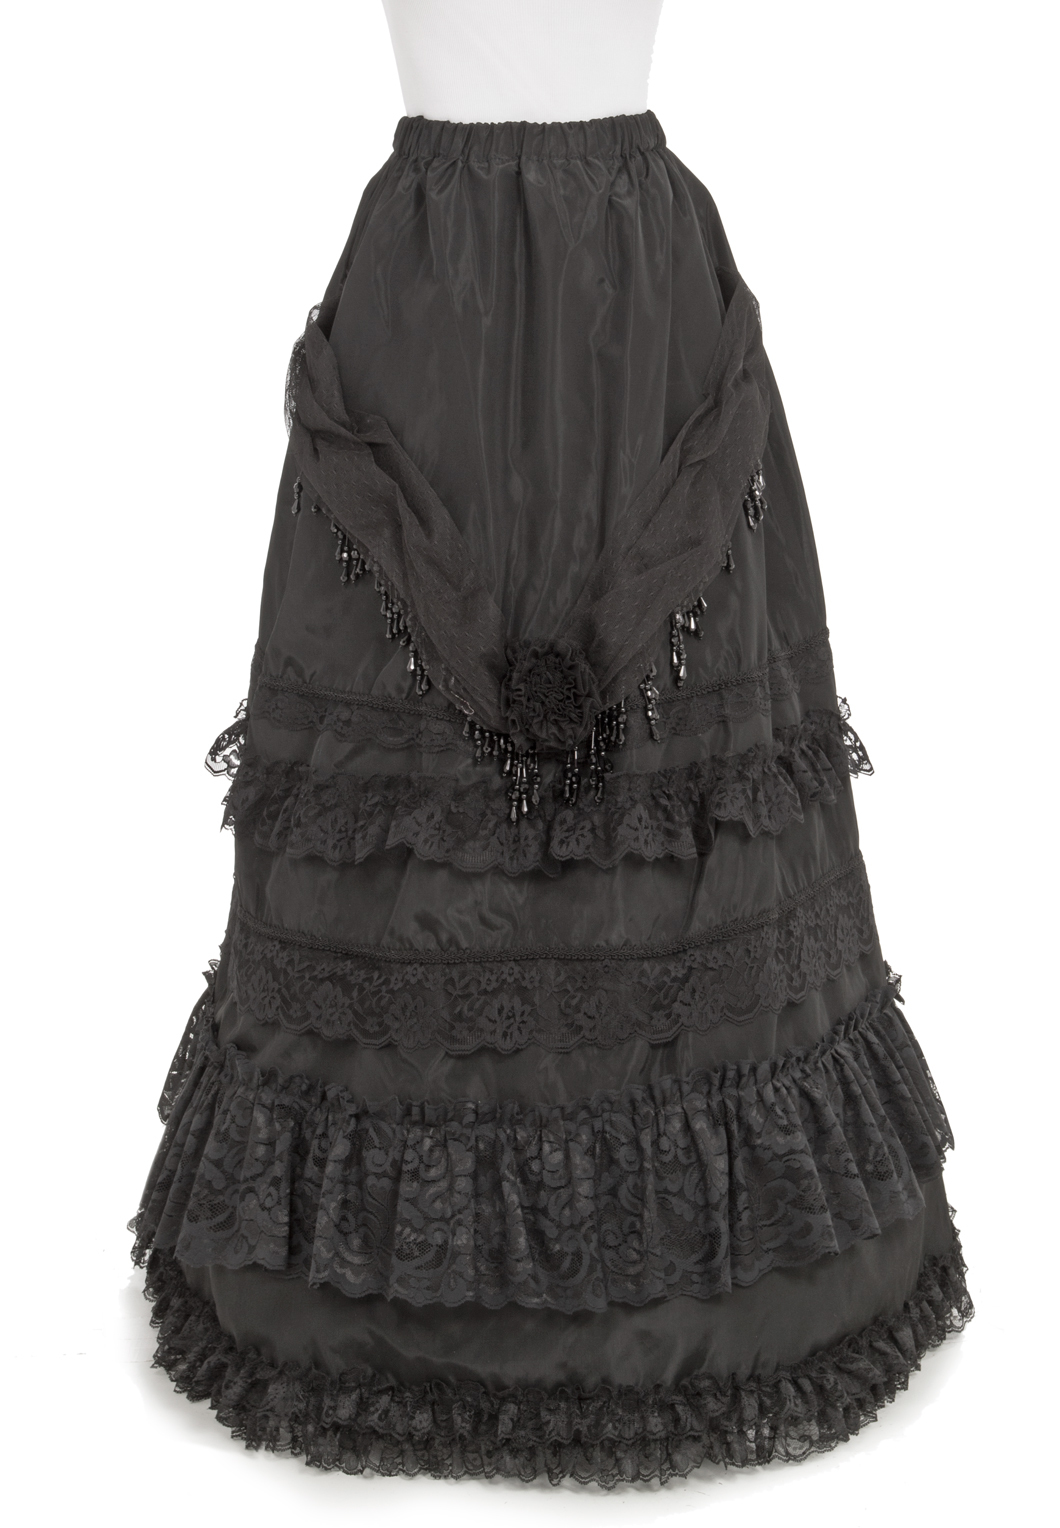 Decorated Lace and Beads Victorian Skirt on sale